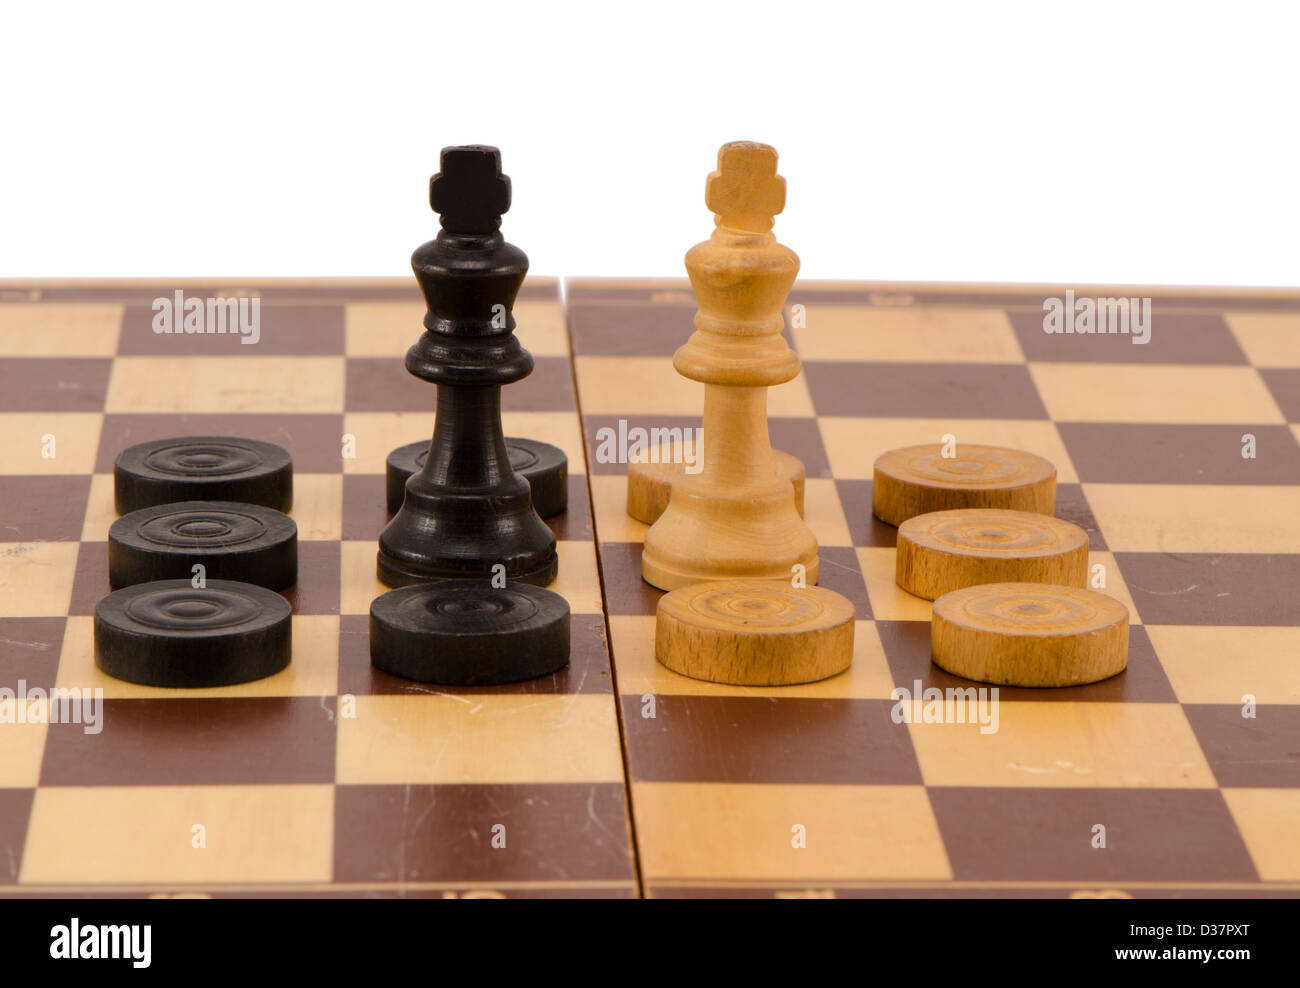 enemy chess queens stand in front surrounded by checkers on wooden board isolated on white Stock Photo